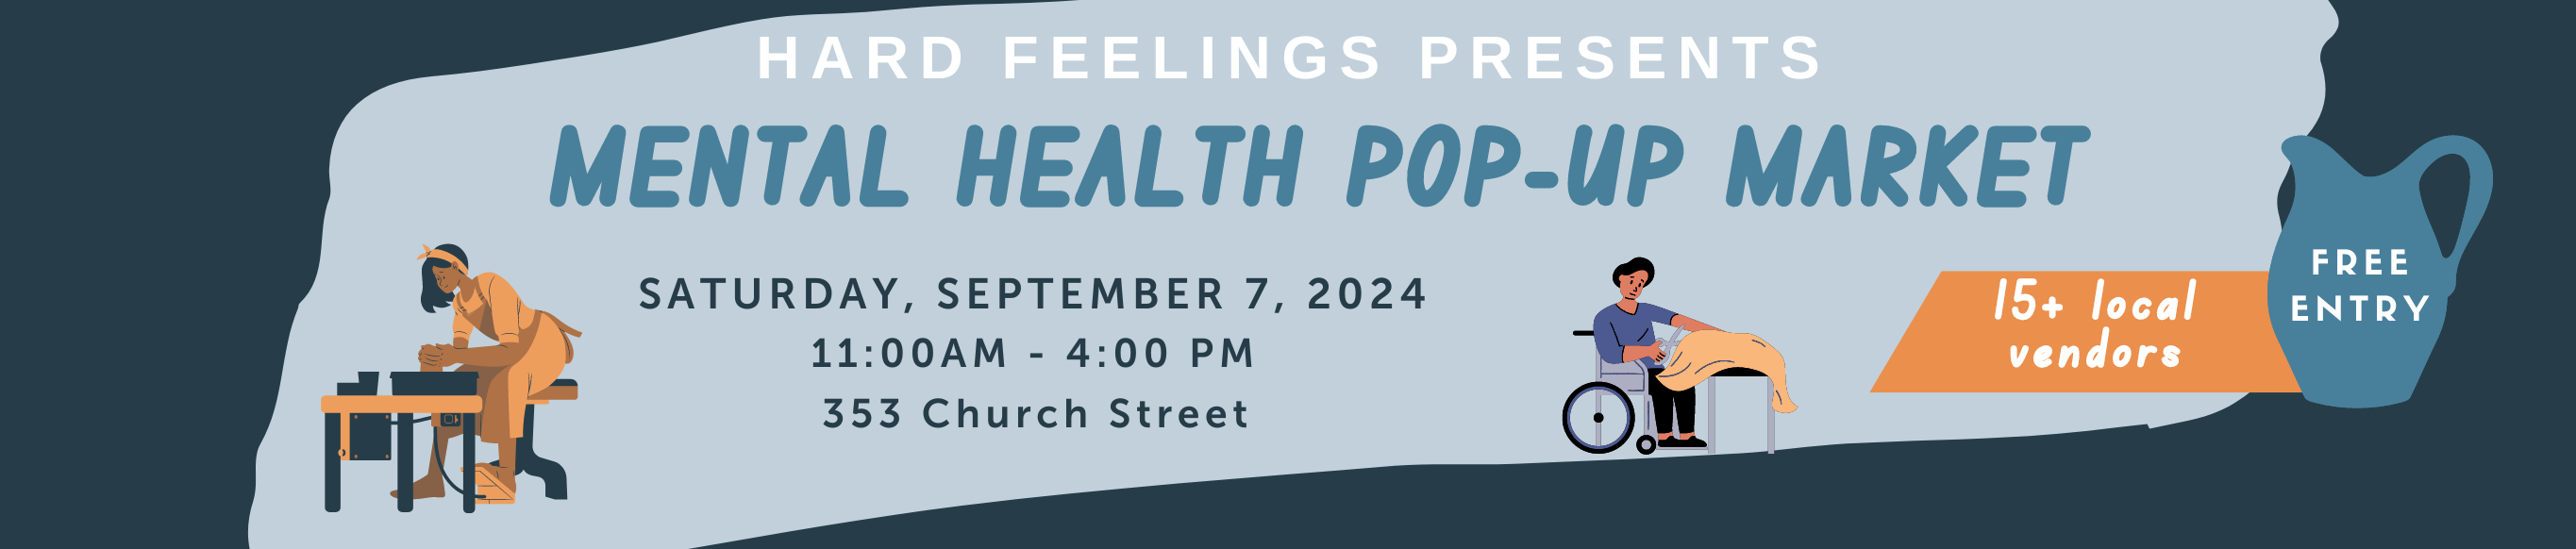 Hard feelings popup 2024 banner image showing the date (Saturday, September 7th 2024) and the time (11am - 4pm)